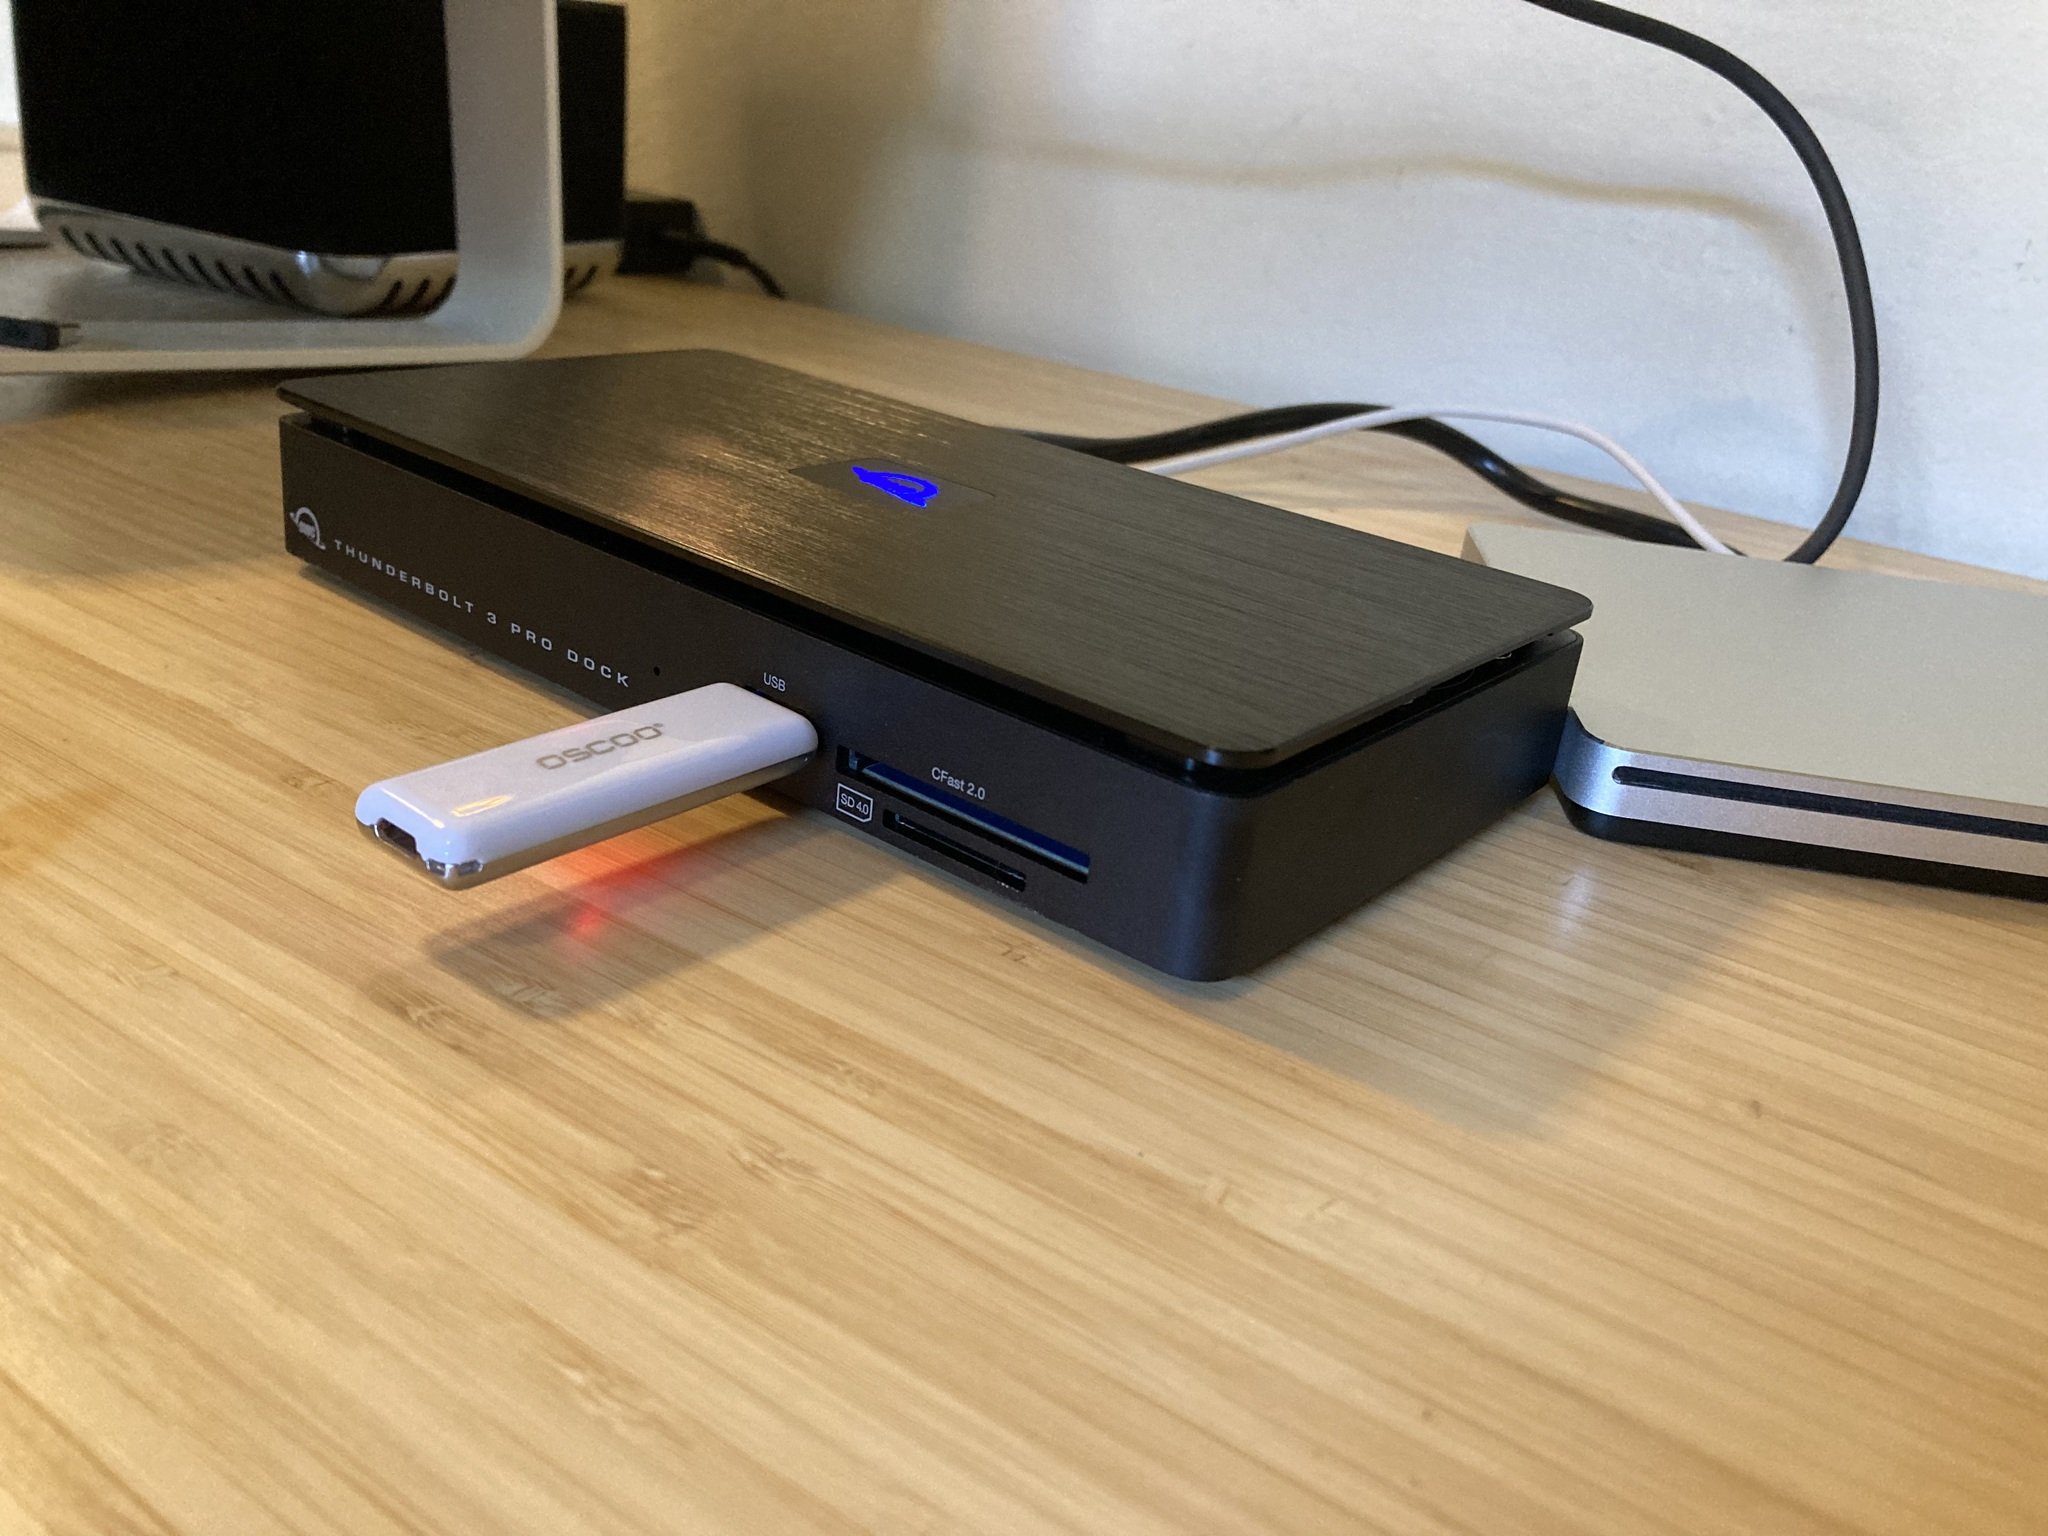 Owc Thunderbolt 3 Pro Dock with connected flash drive and DVD drive